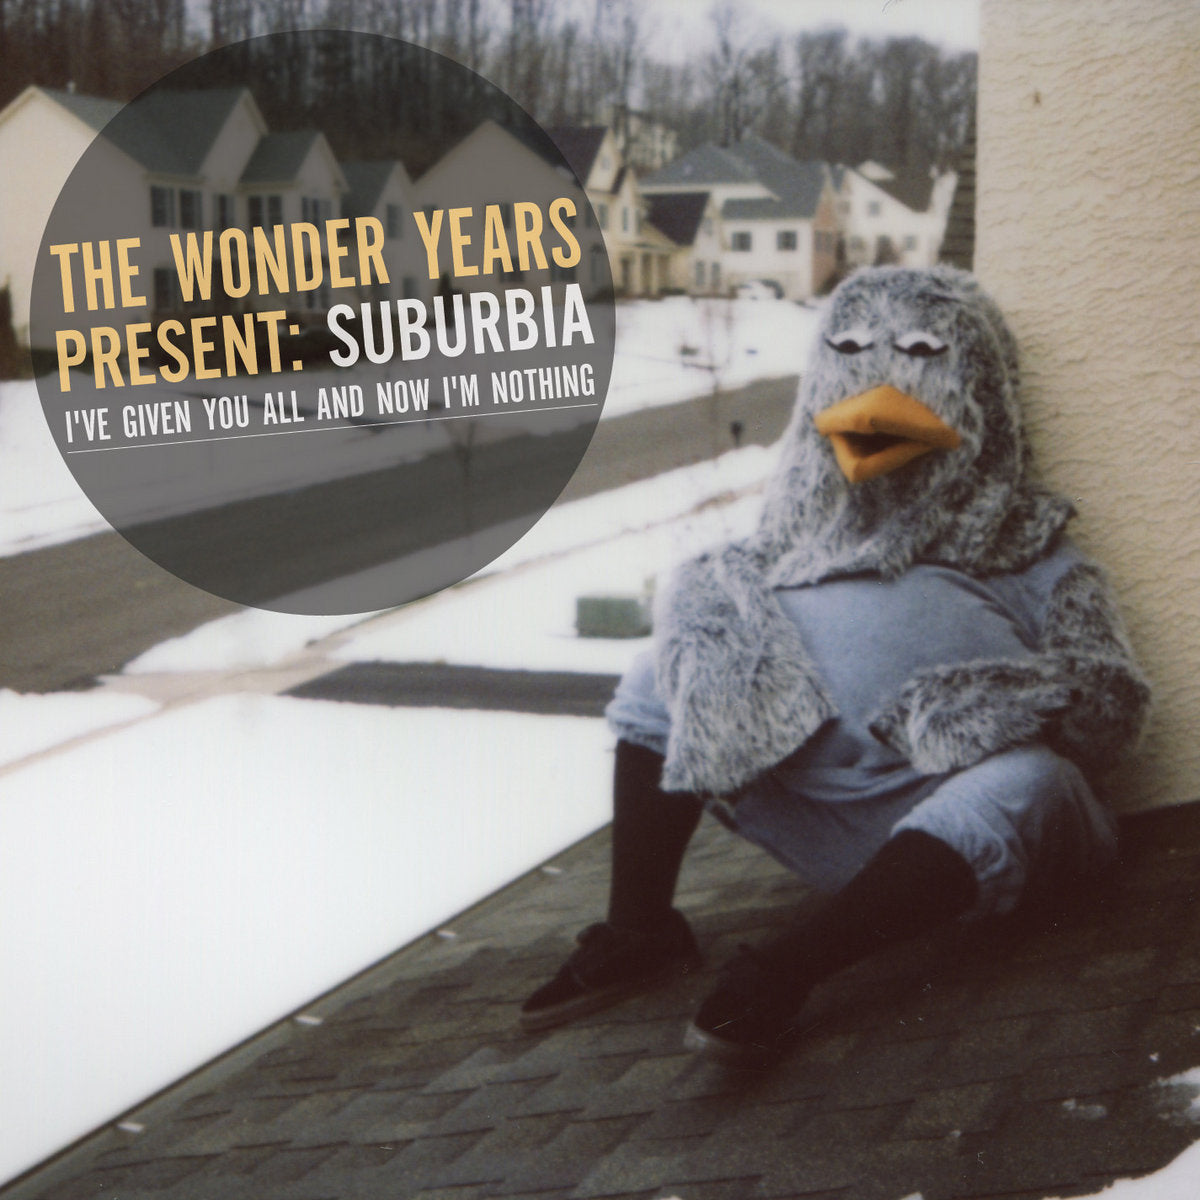 The Wonder Years "Suburbia I've Given You All and Now I'm Nothing" CD